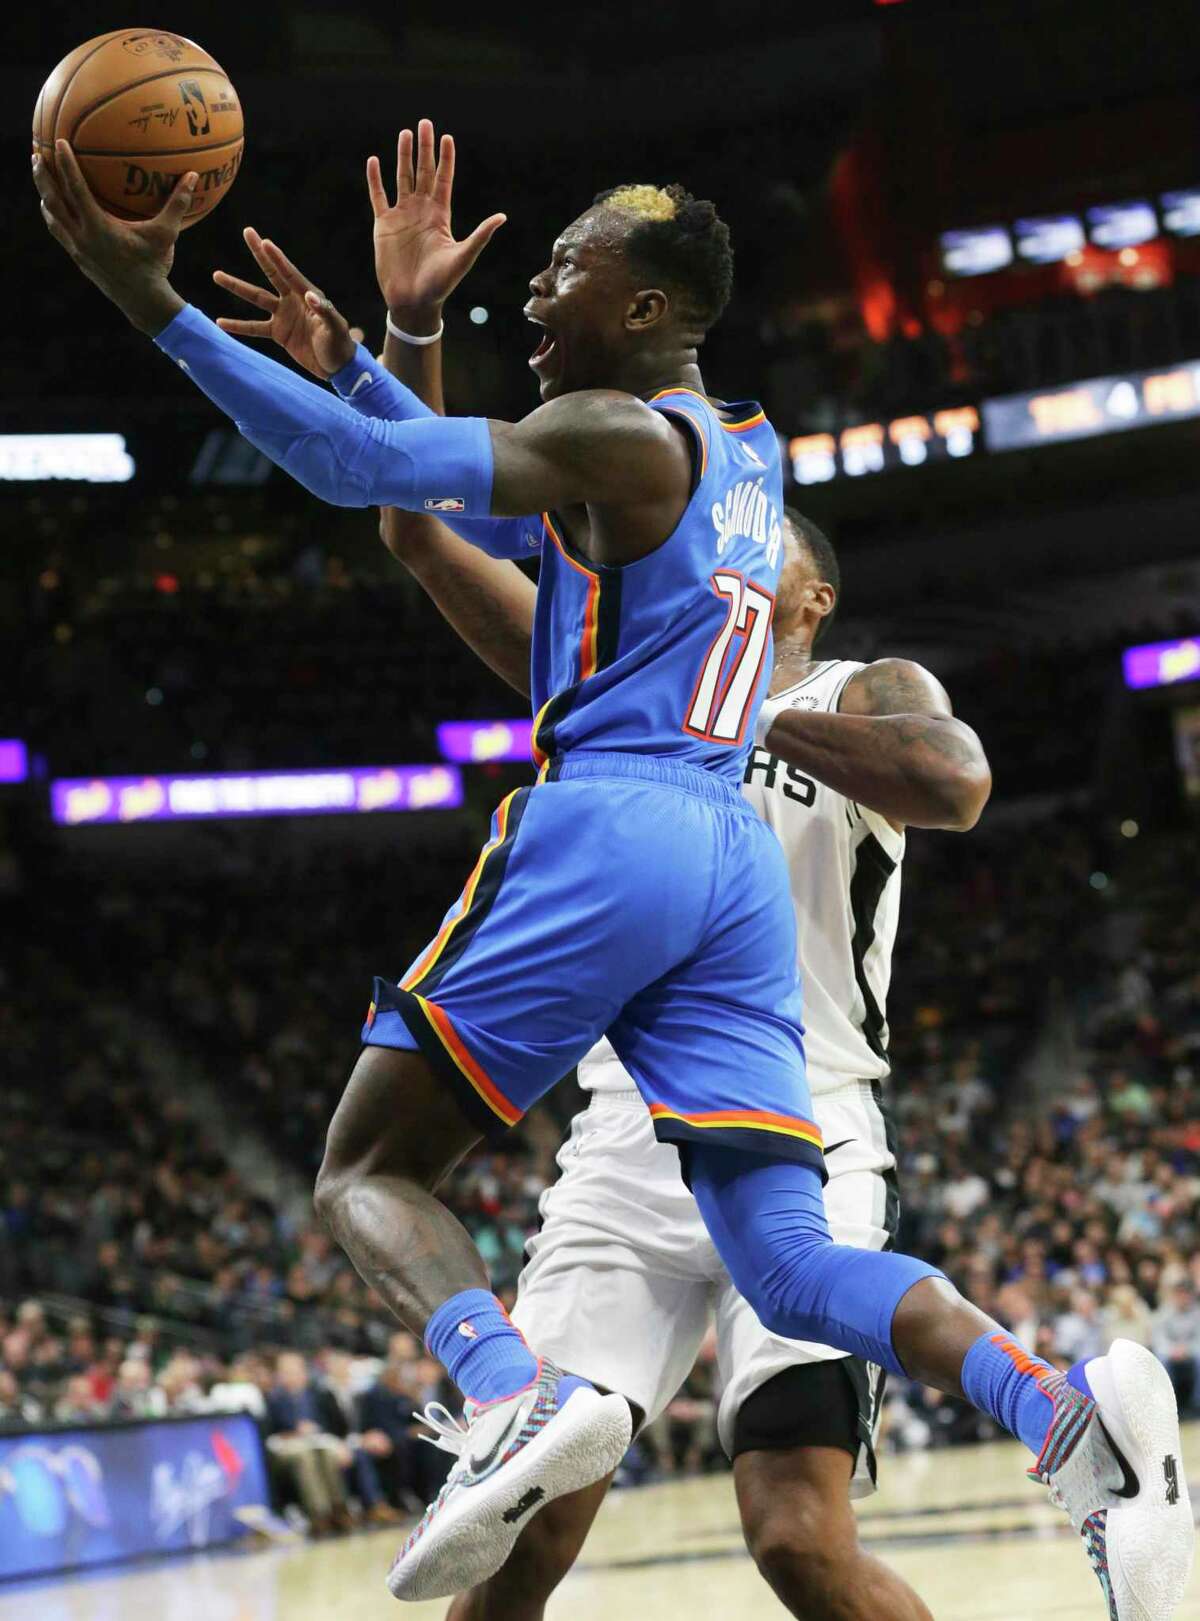 Dennis Schroder drives to the hoop for OKC as the Spurs hosts the Thunder at the AT&T Center on Nov. 7, 2019.